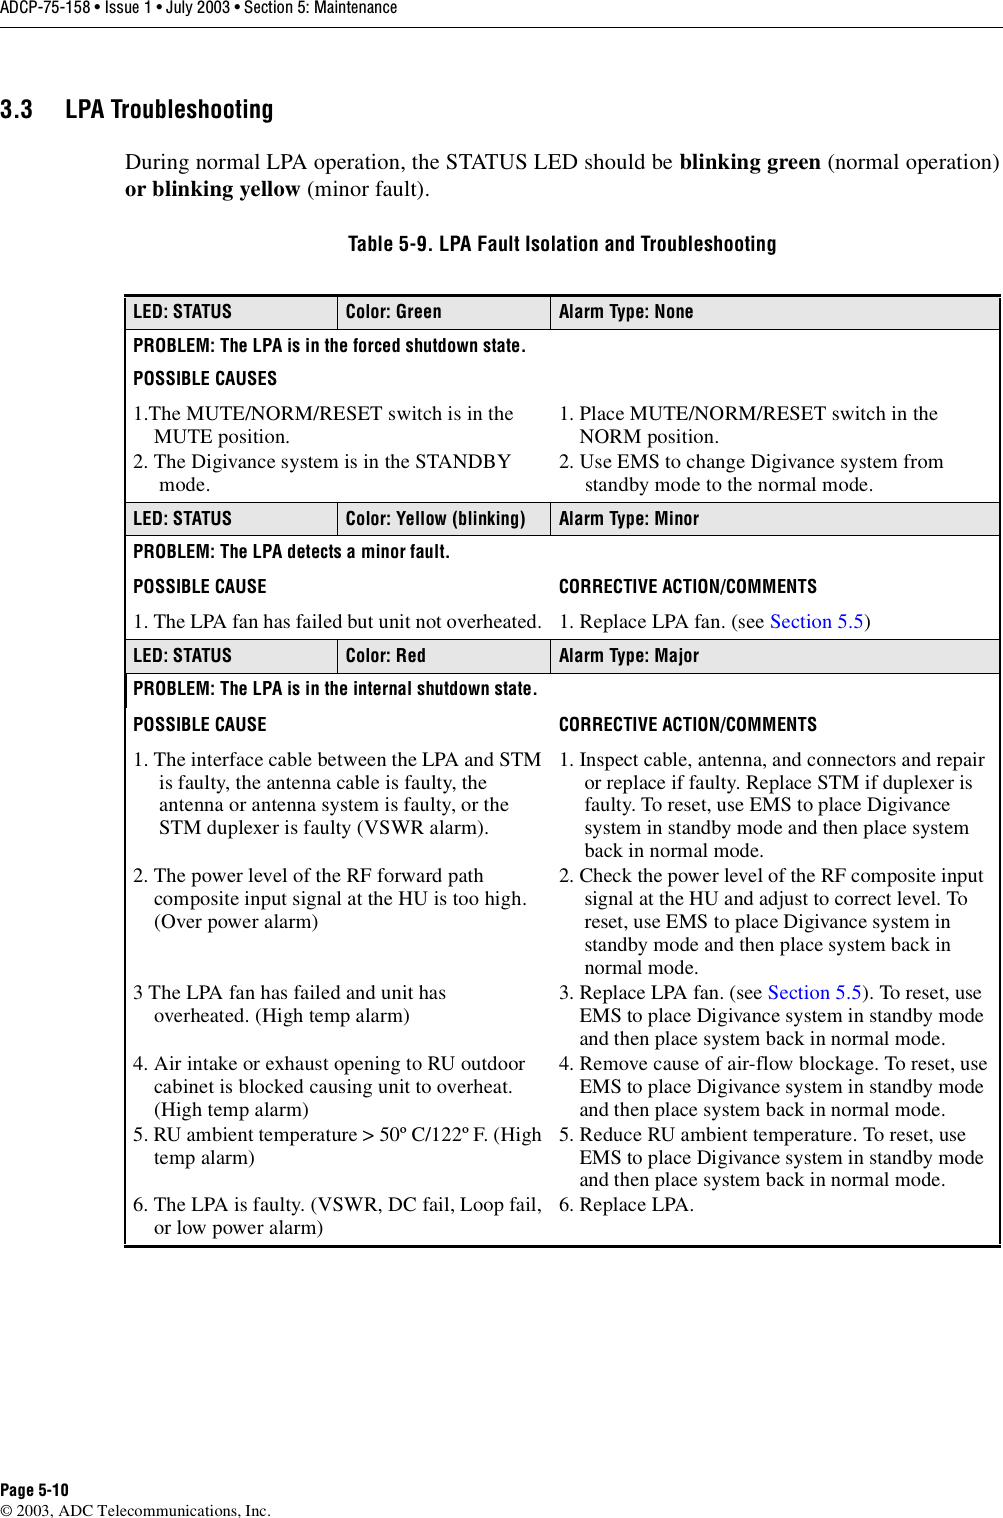 ADCP-75-158 • Issue 1 • July 2003 • Section 5: MaintenancePage 5-10© 2003, ADC Telecommunications, Inc.3.3 LPA TroubleshootingDuring normal LPA operation, the STATUS LED should be blinking green (normal operation)or blinking yellow (minor fault). Table 5-9. LPA Fault Isolation and TroubleshootingLED: STATUS Color: Green Alarm Type: NonePROBLEM: The LPA is in the forced shutdown state.POSSIBLE CAUSES1.The MUTE/NORM/RESET switch is in the    MUTE position. 2. The Digivance system is in the STANDBY     mode. 1. Place MUTE/NORM/RESET switch in the    NORM position. 2. Use EMS to change Digivance system from     standby mode to the normal mode. LED: STATUS Color: Yellow (blinking) Alarm Type: MinorPROBLEM: The LPA detects a minor fault. POSSIBLE CAUSE CORRECTIVE ACTION/COMMENTS1. The LPA fan has failed but unit not overheated. 1. Replace LPA fan. (see Section 5.5)LED: STATUS Color: Red Alarm Type: MajorPROBLEM: The LPA is in the internal shutdown state.POSSIBLE CAUSE CORRECTIVE ACTION/COMMENTS1. The interface cable between the LPA and STM     is faulty, the antenna cable is faulty, the     antenna or antenna system is faulty, or the     STM duplexer is faulty (VSWR alarm).2. The power level of the RF forward path     composite input signal at the HU is too high.    (Over power alarm)3 The LPA fan has failed and unit has     overheated. (High temp alarm)4. Air intake or exhaust opening to RU outdoor    cabinet is blocked causing unit to overheat.    (High temp alarm)5. RU ambient temperature &gt; 50º C/122º F. (High    temp alarm)6. The LPA is faulty. (VSWR, DC fail, Loop fail,    or low power alarm)1. Inspect cable, antenna, and connectors and repair     or replace if faulty. Replace STM if duplexer is     faulty. To reset, use EMS to place Digivance      system in standby mode and then place system     back in normal mode. 2. Check the power level of the RF composite input     signal at the HU and adjust to correct level. To     reset, use EMS to place Digivance system in     standby mode and then place system back in      normal mode. 3. Replace LPA fan. (see Section 5.5). To reset, use    EMS to place Digivance system in standby mode    and then place system back in normal mode. 4. Remove cause of air-flow blockage. To reset, use    EMS to place Digivance system in standby mode    and then place system back in normal mode. 5. Reduce RU ambient temperature. To reset, use    EMS to place Digivance system in standby mode    and then place system back in normal mode. 6. Replace LPA. 